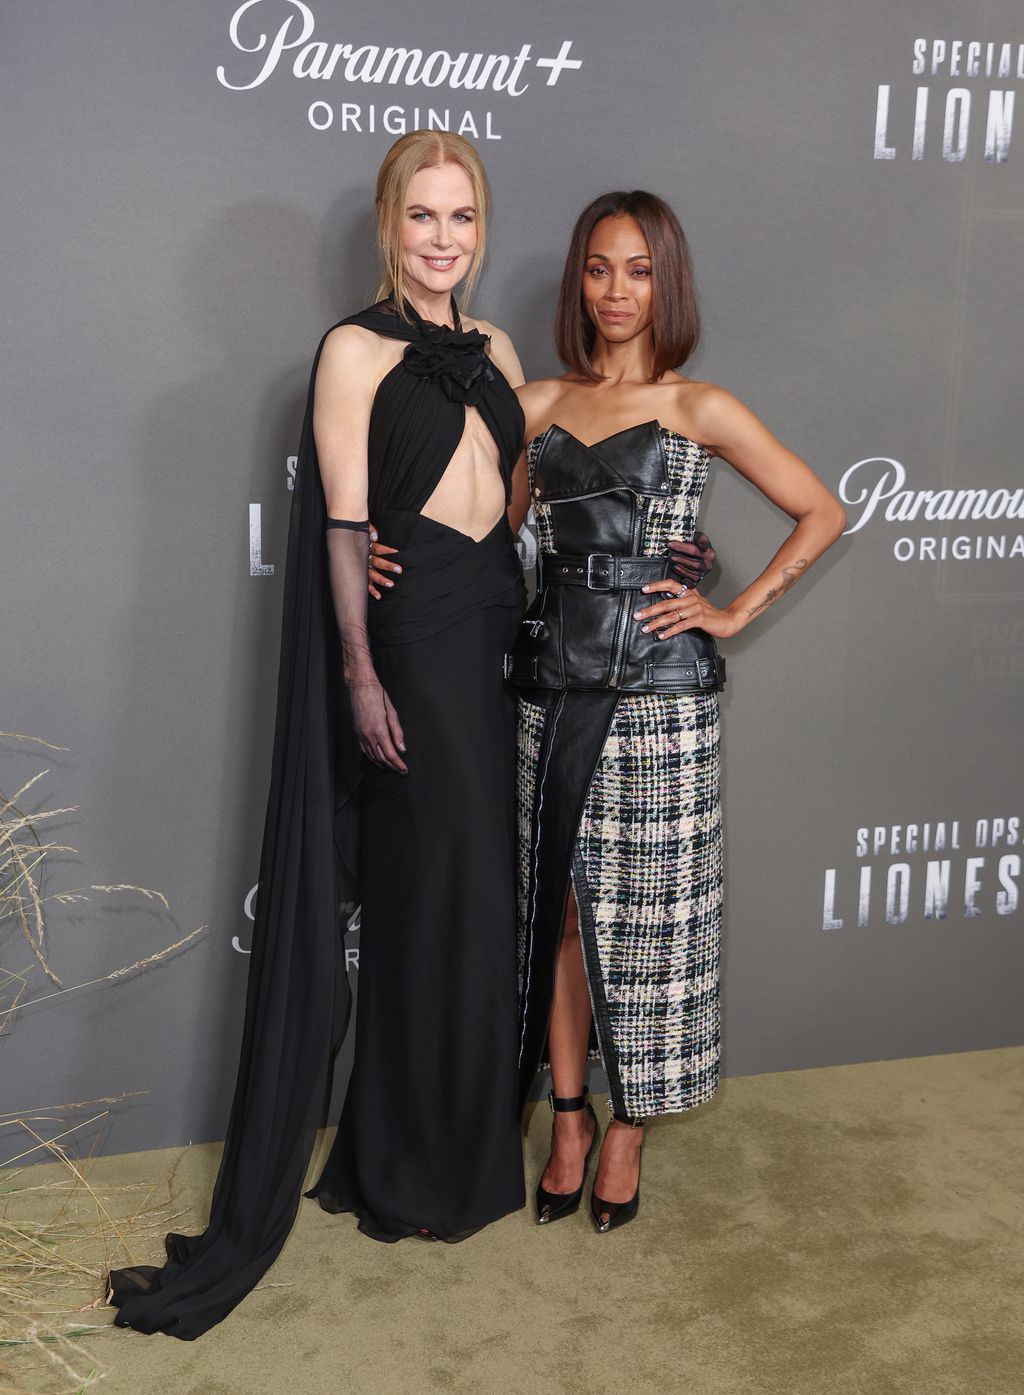 Nicole Kidman in black cut out dress posing with Zoe Saldana at Special Ops: Lioness